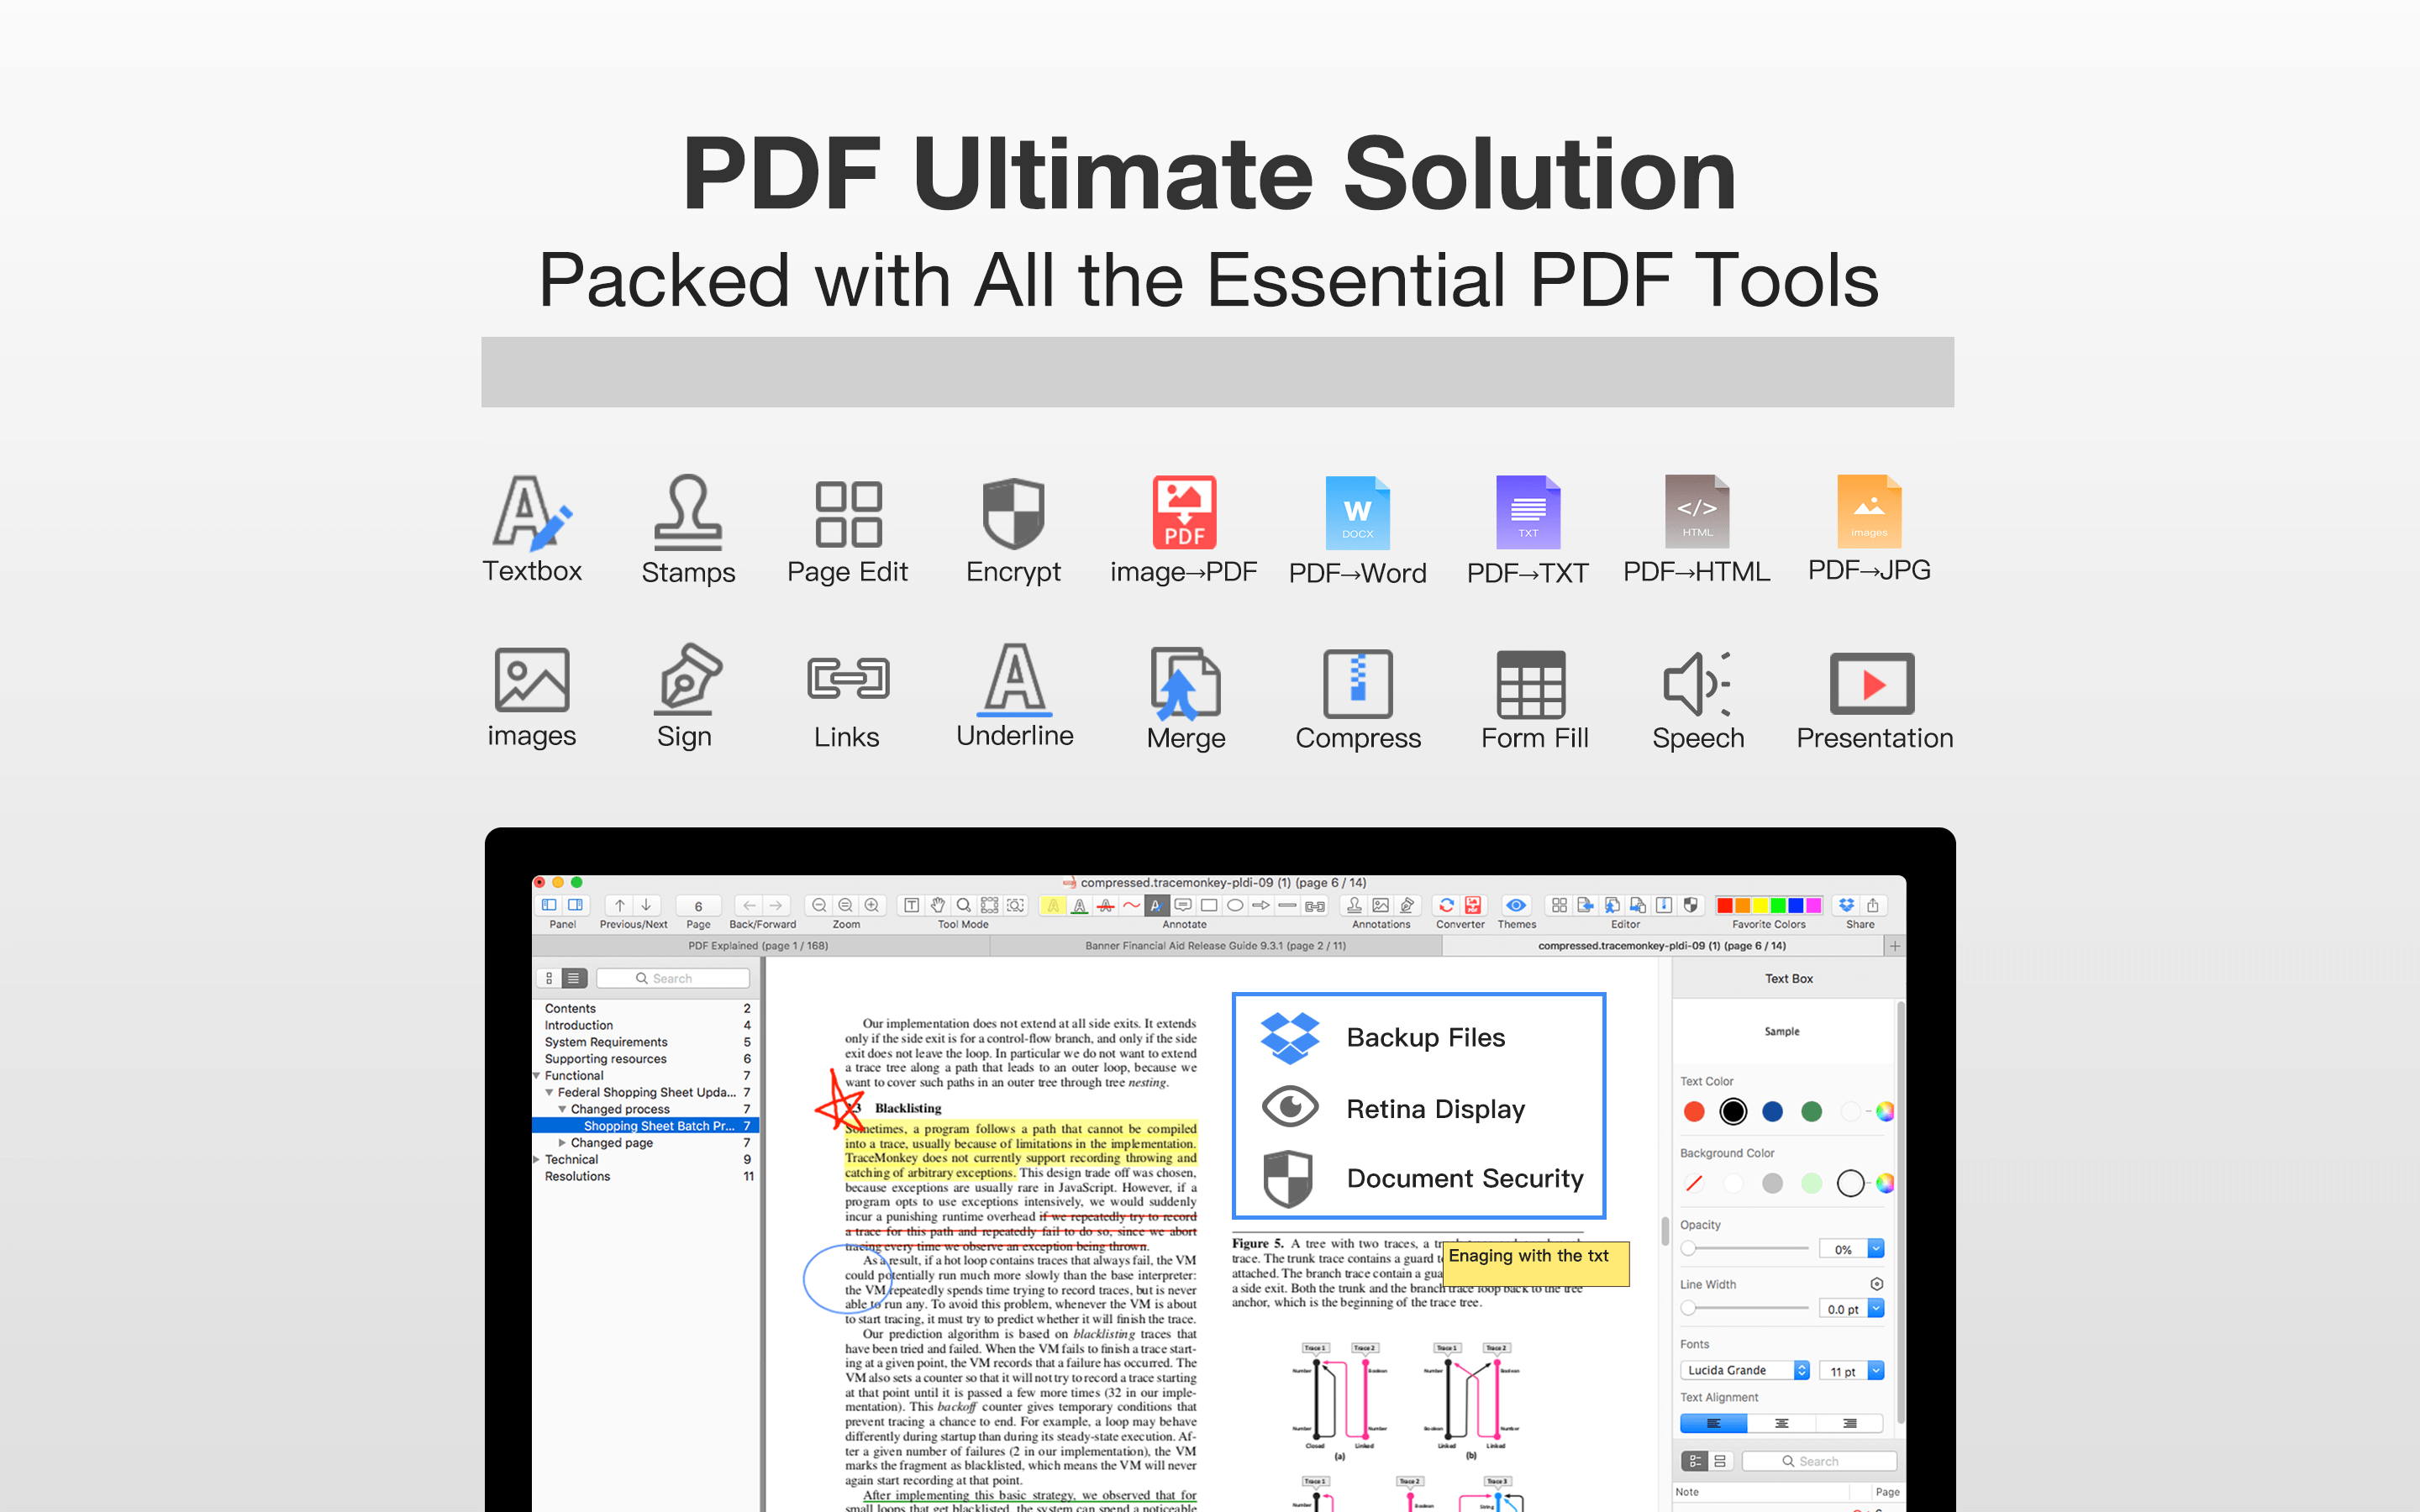 Find detailed information about PDF Professional